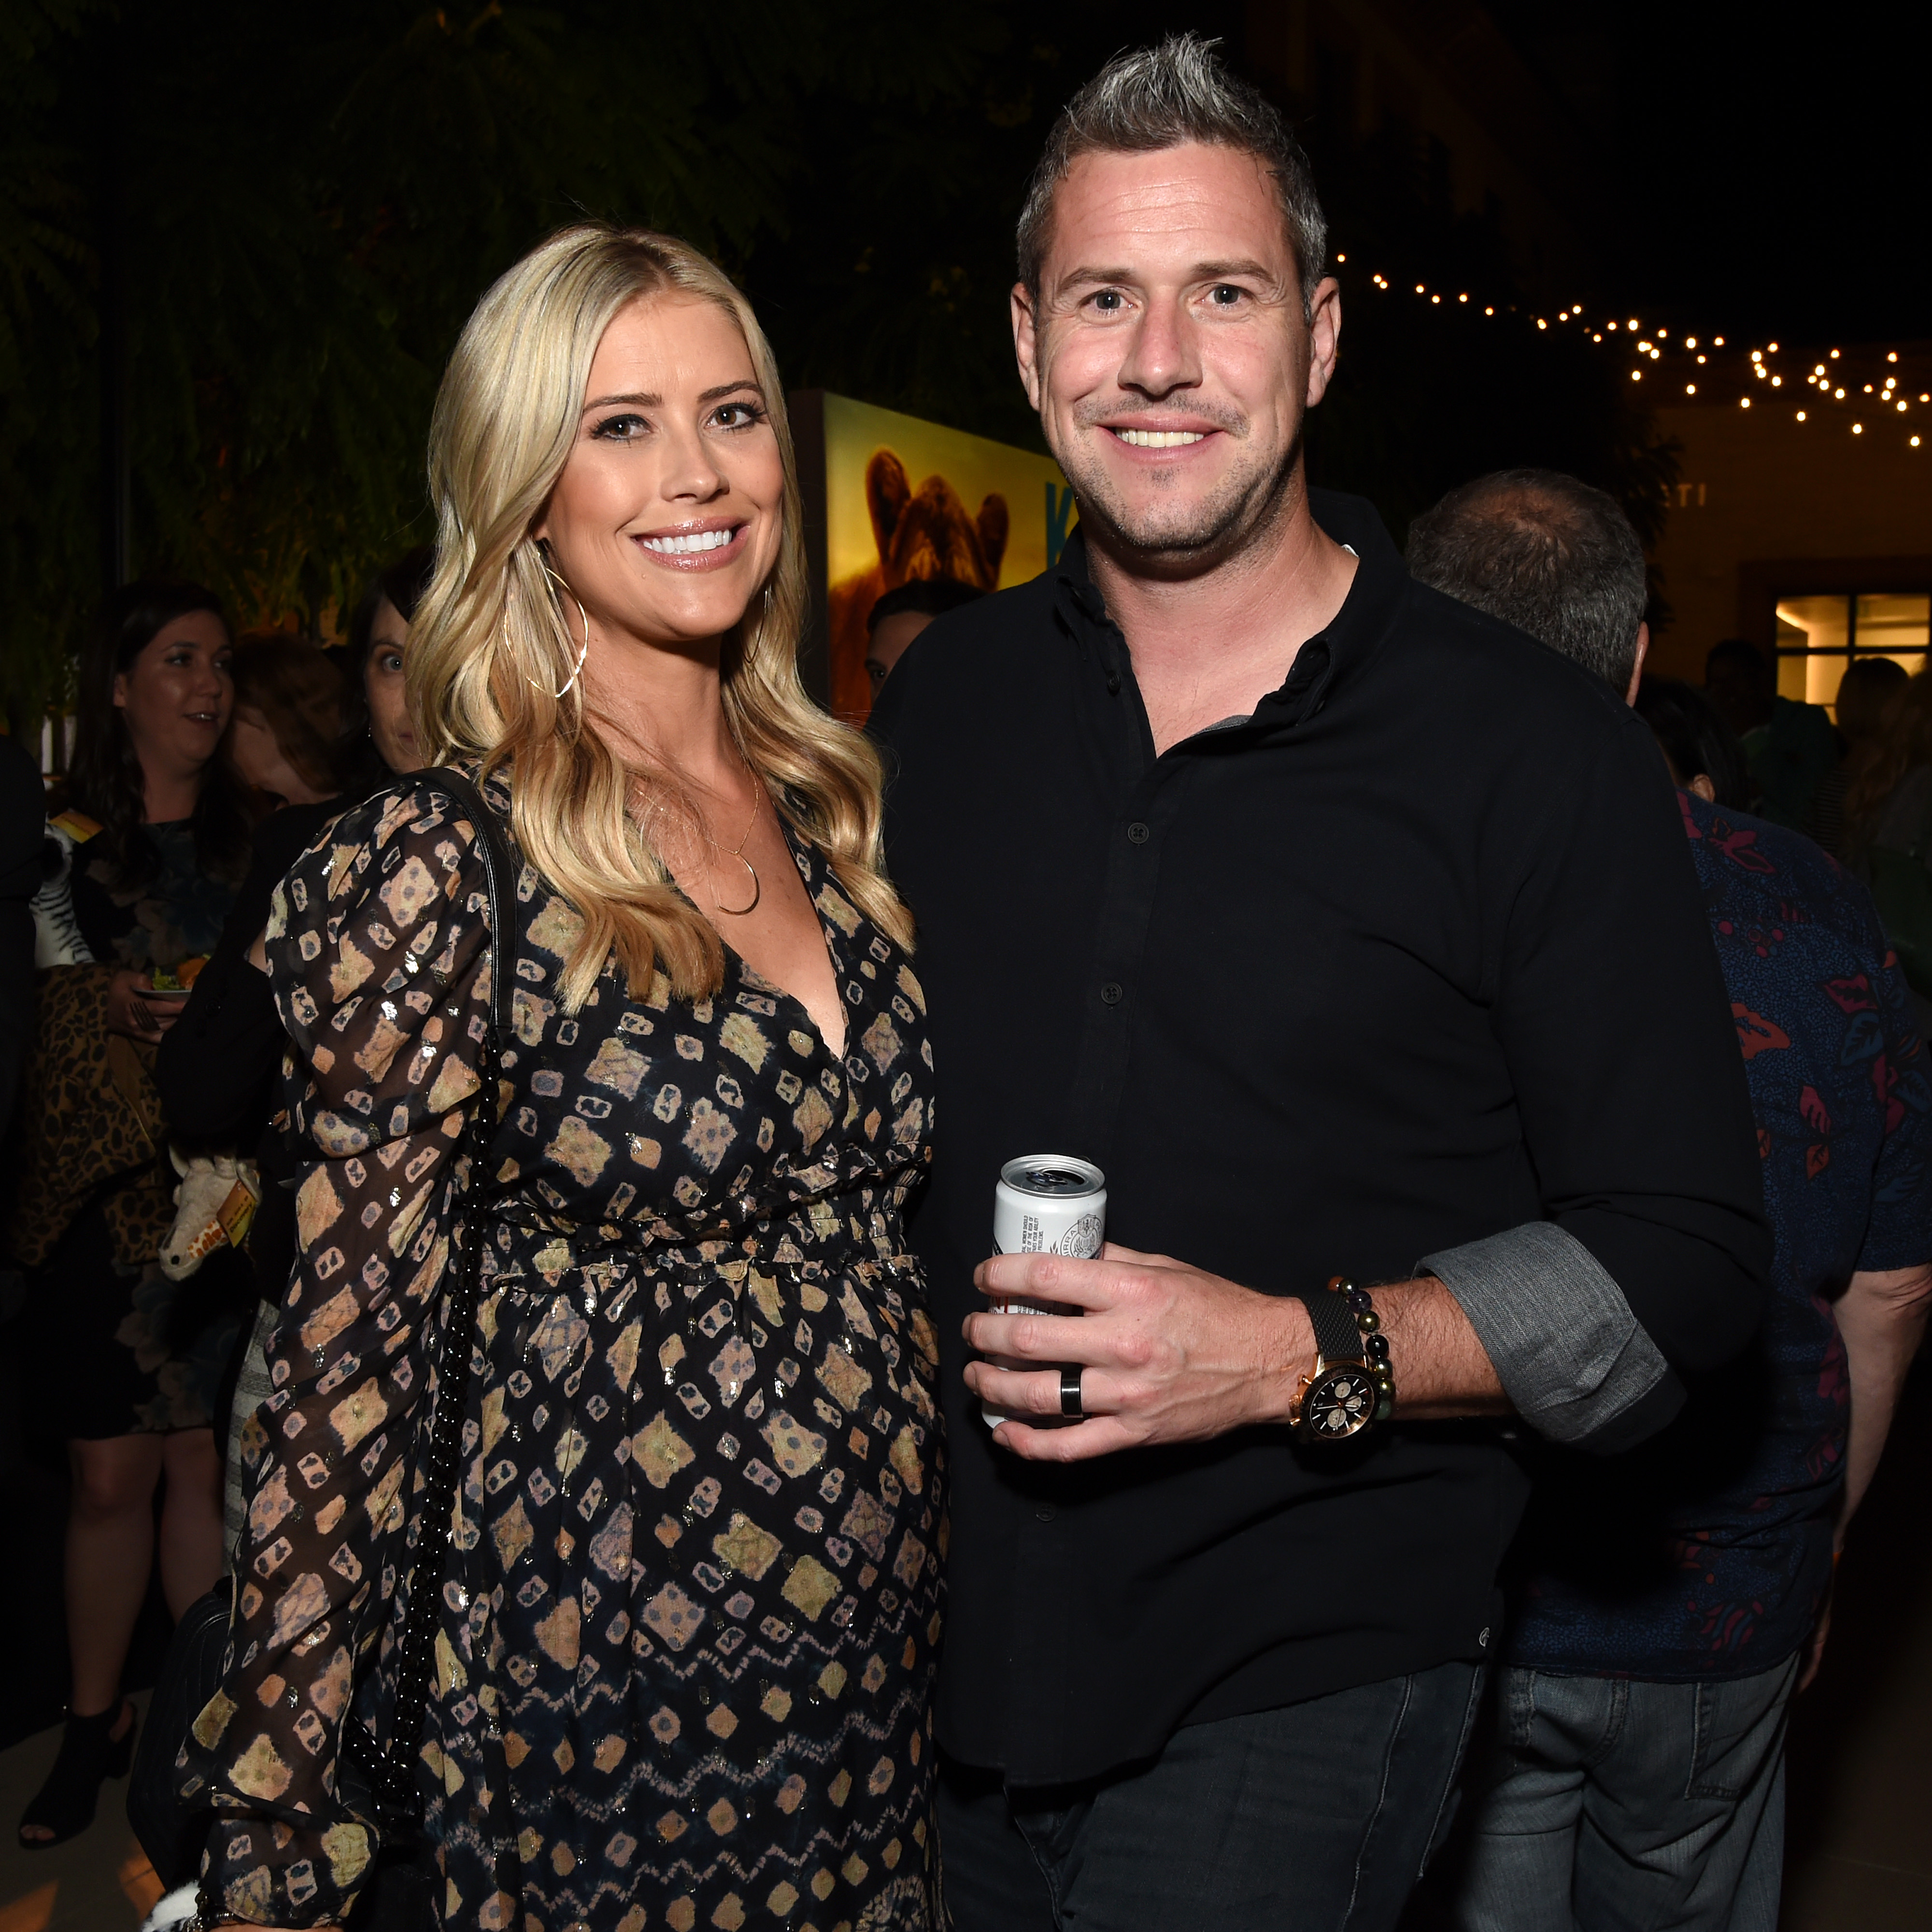 Christina Anstead and Ant Anstead attend Discovery's 'Serengeti' premiere at Wallis Annenberg Center for the Performing Arts